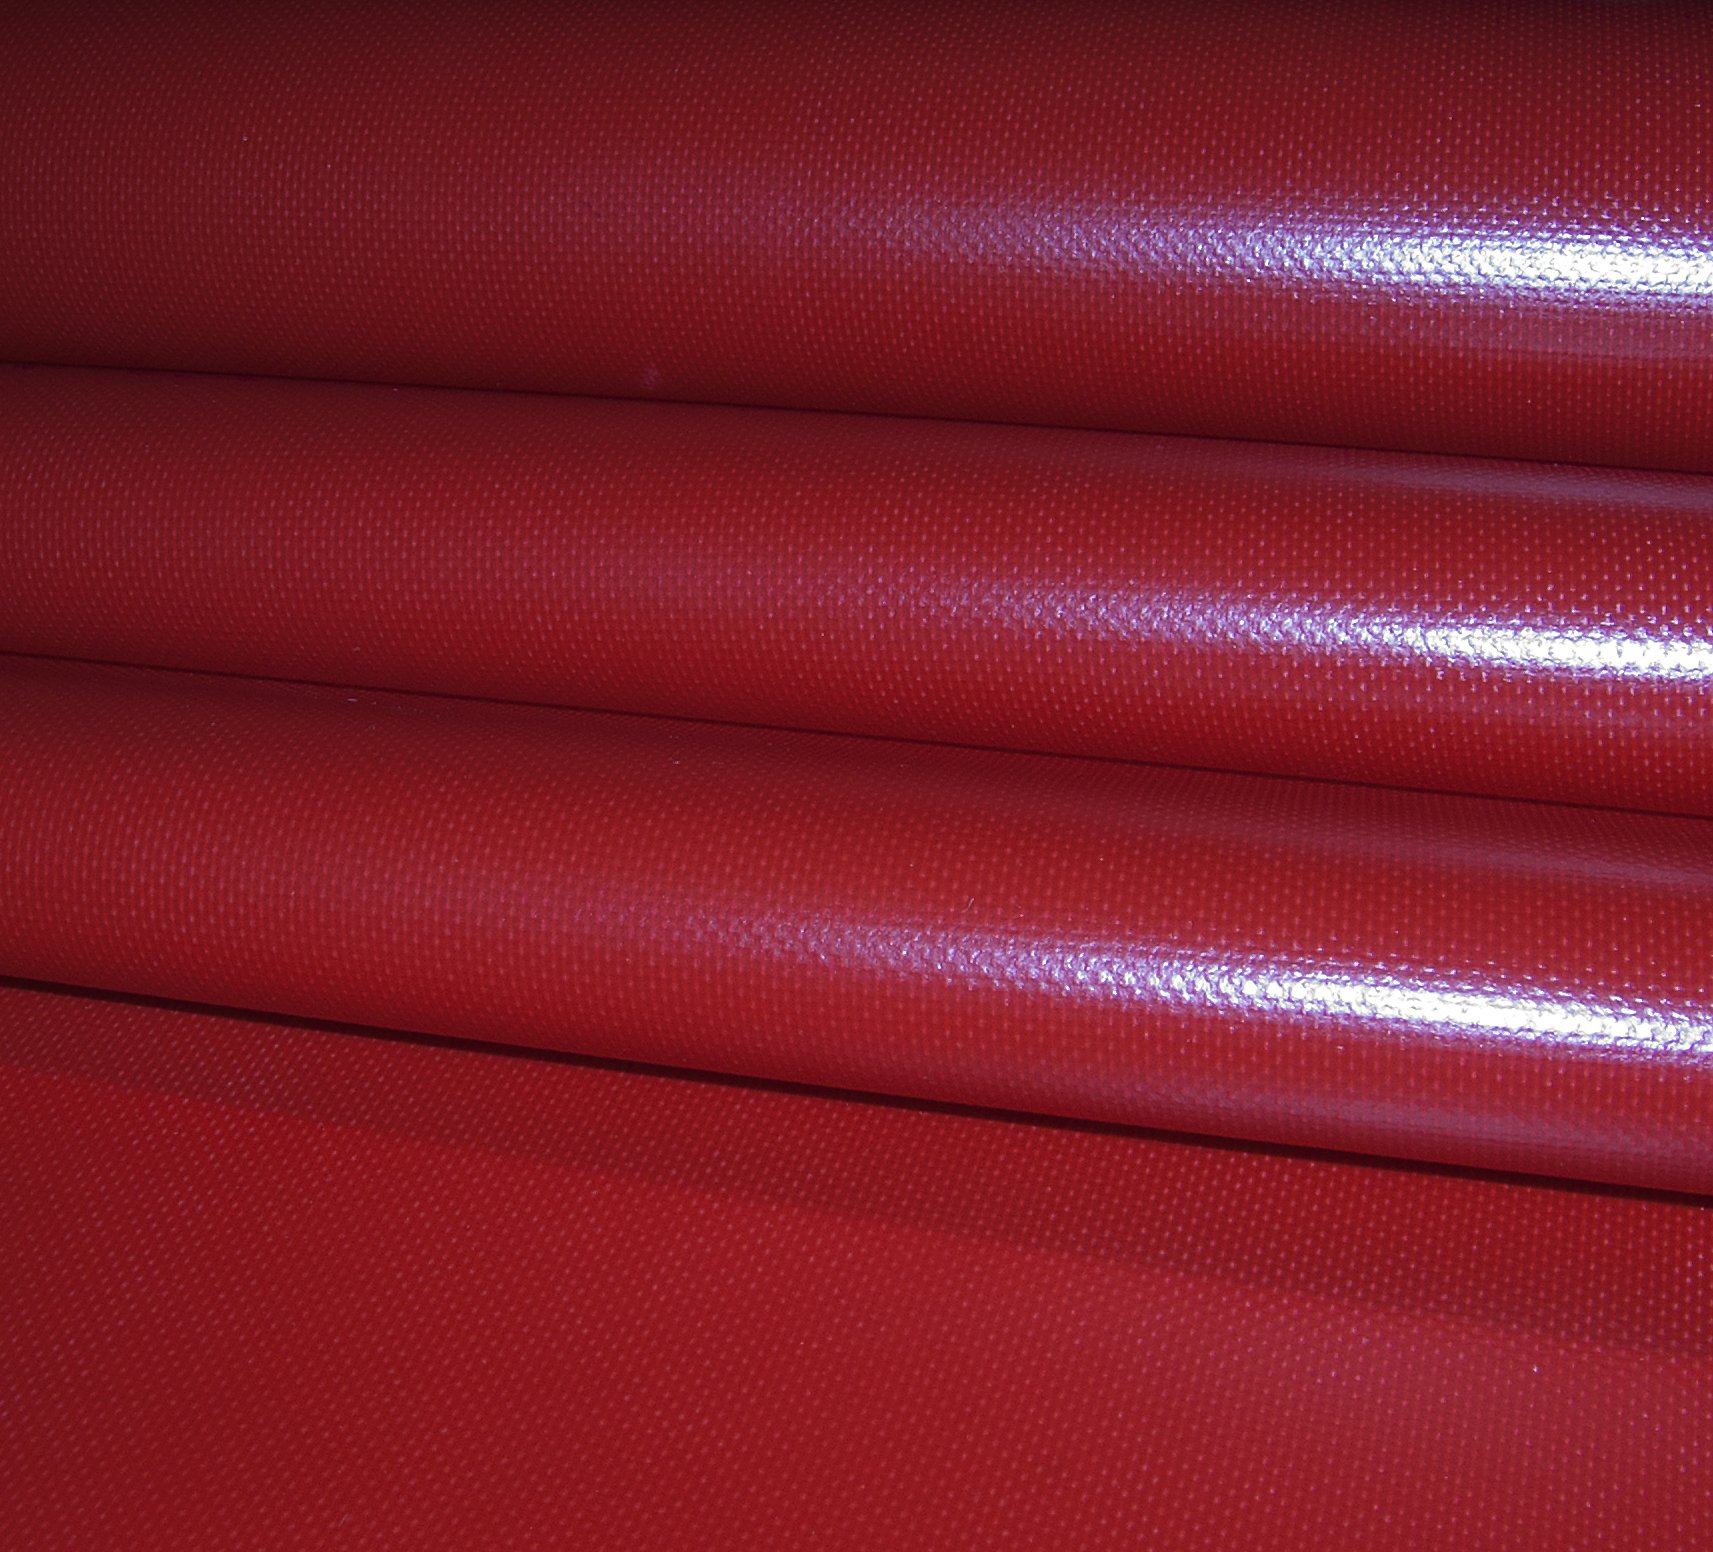  Vinyl Red, Fabric by the Yard